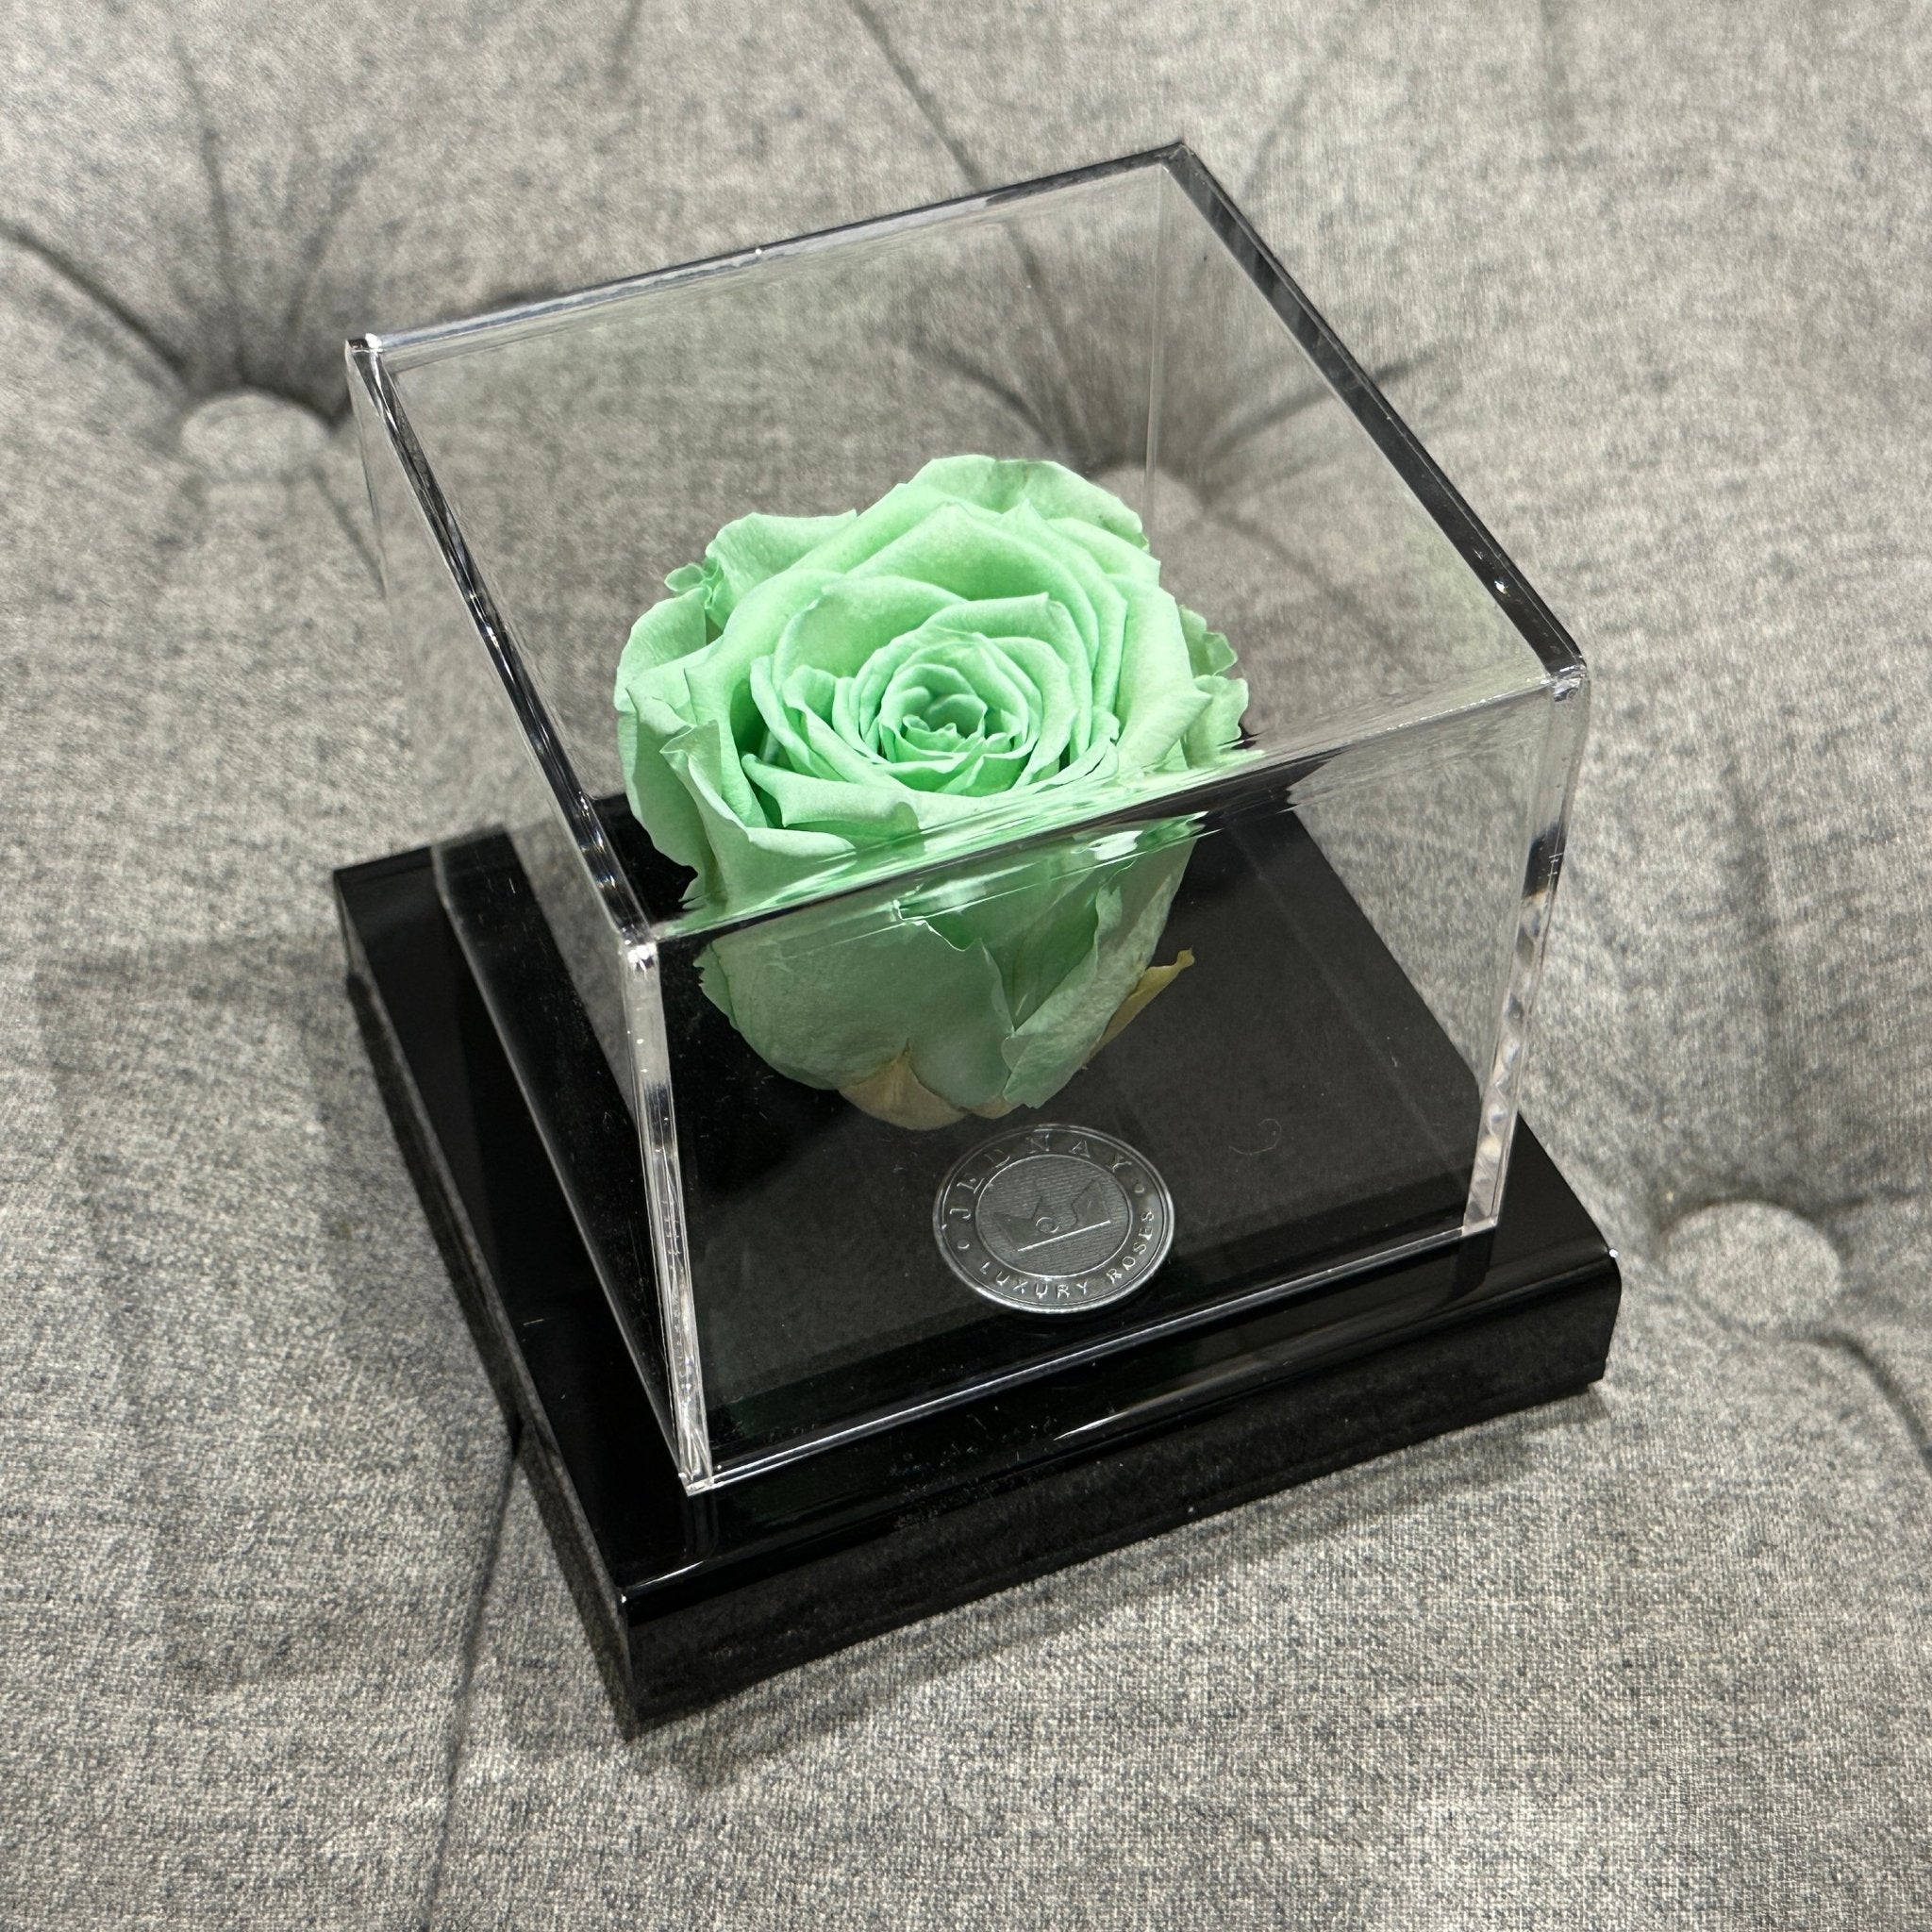 The Clarity Deluxe | Peppermint Tea Eternal Rose - Jednay Roses